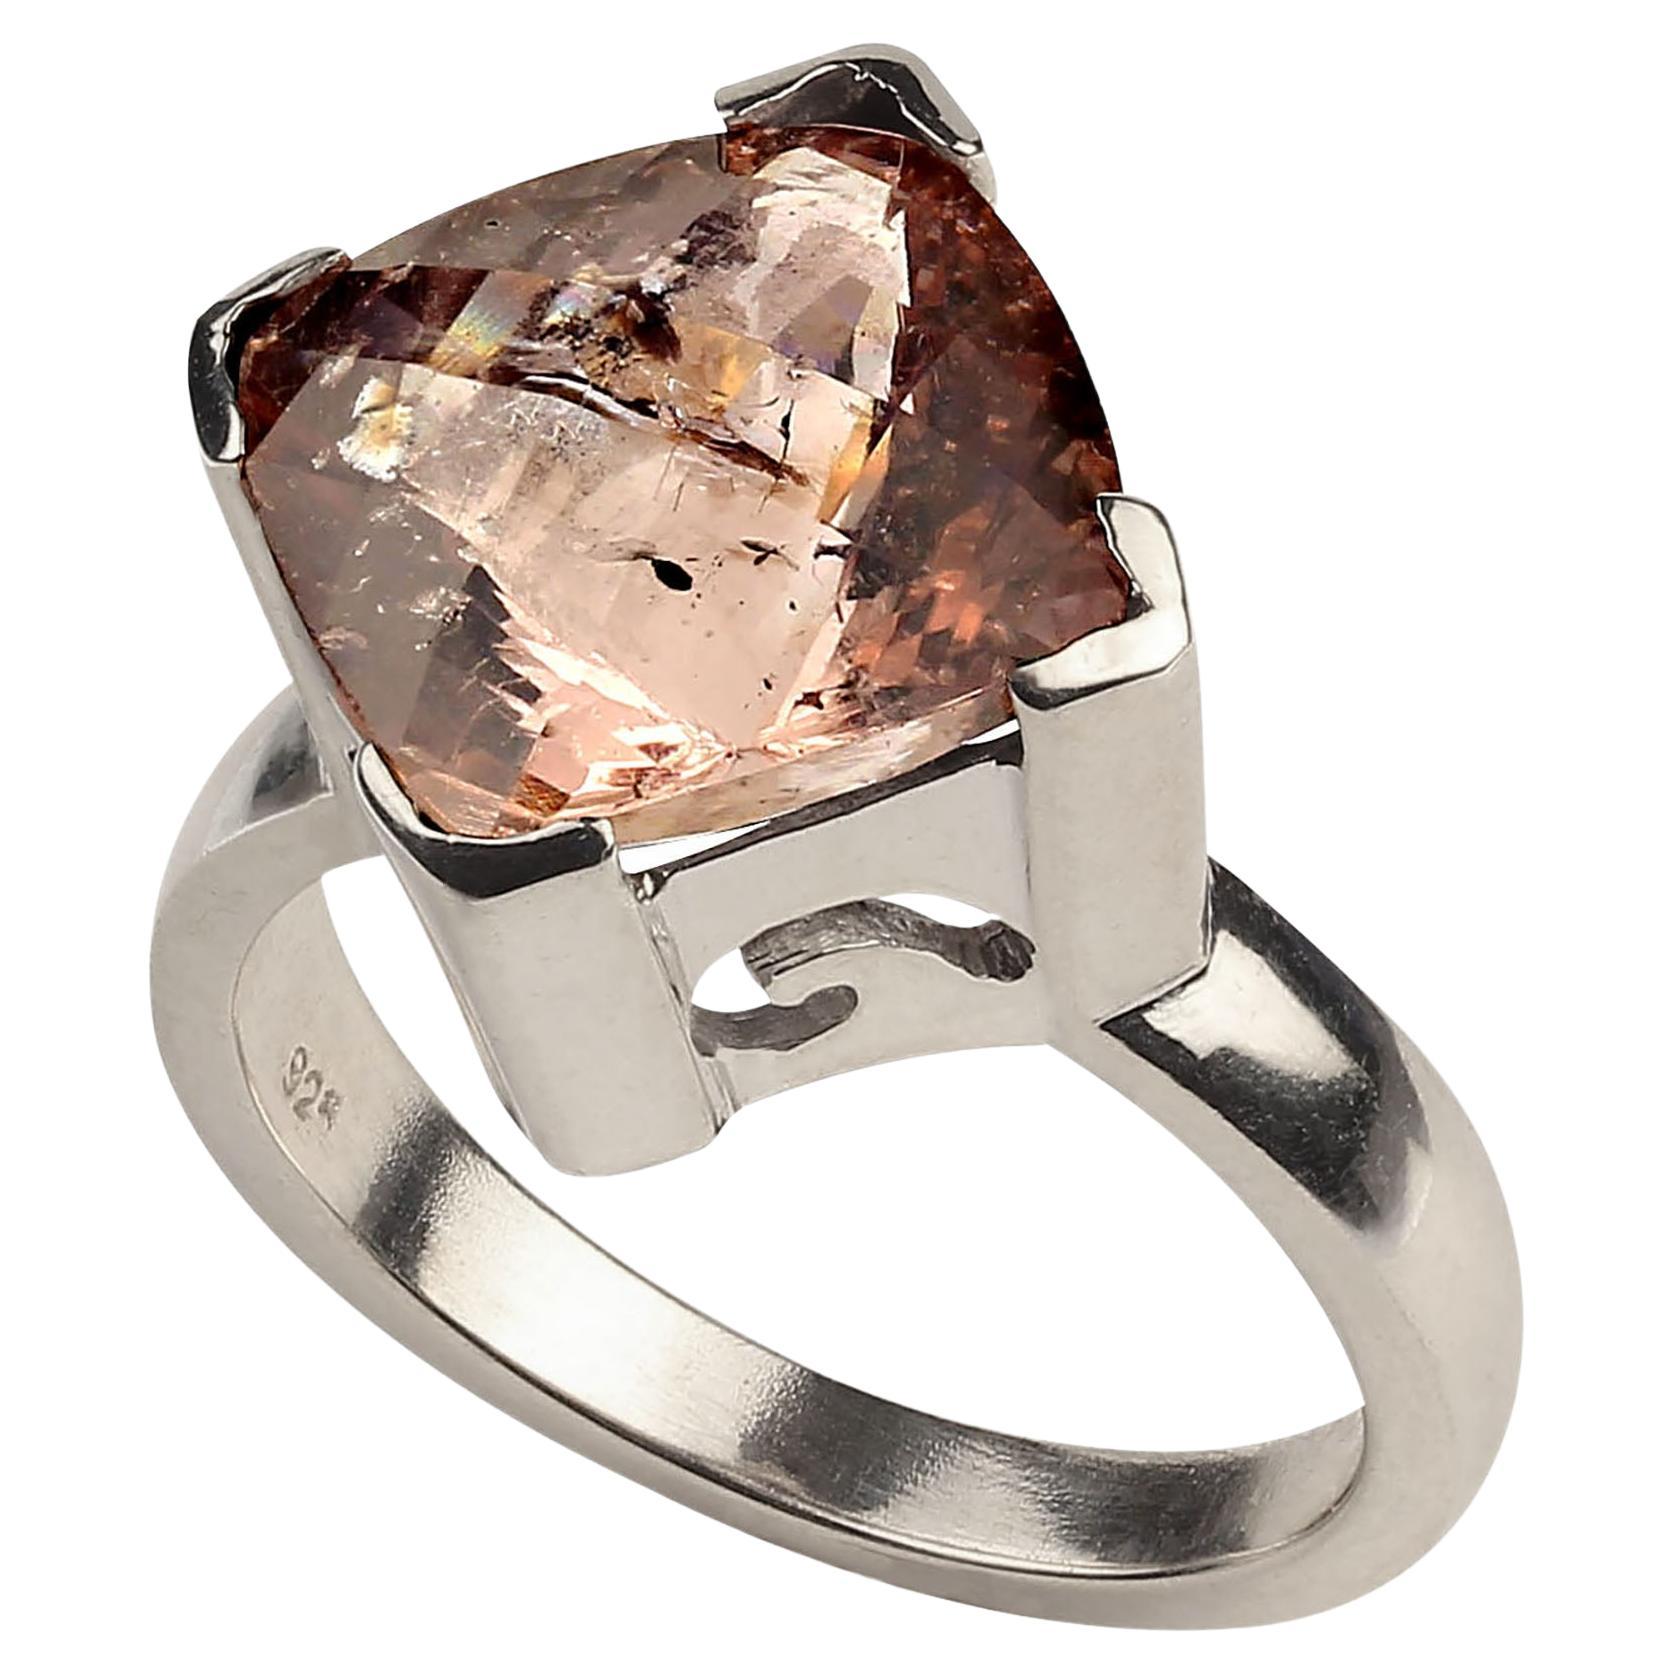 Genuine 7.31ct mouthwatering Morganite set in a lovely detailed Sterling Silver ring.  The antique cushion cut morganite is set at 90 degrees so the corners face your knuckles.  This gemstones features a checkerboard table and is a lovely peachy